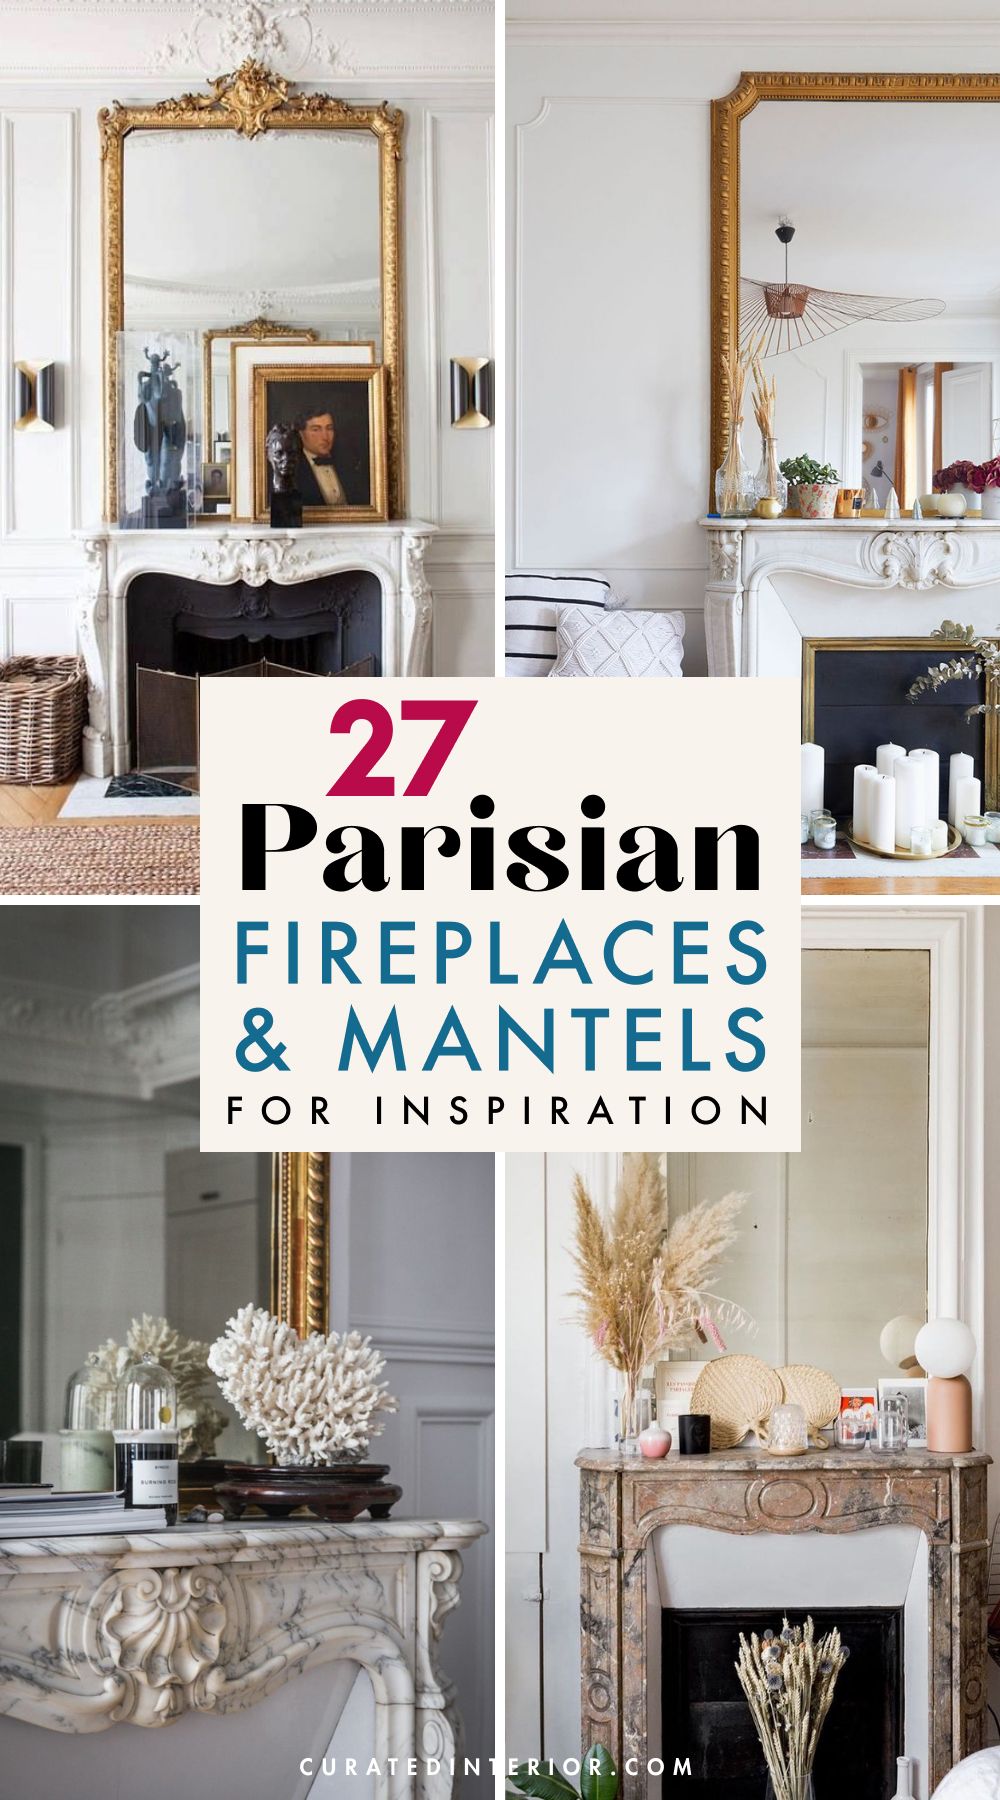 27 Parisian Fireplaces and Mantels for Inspiration